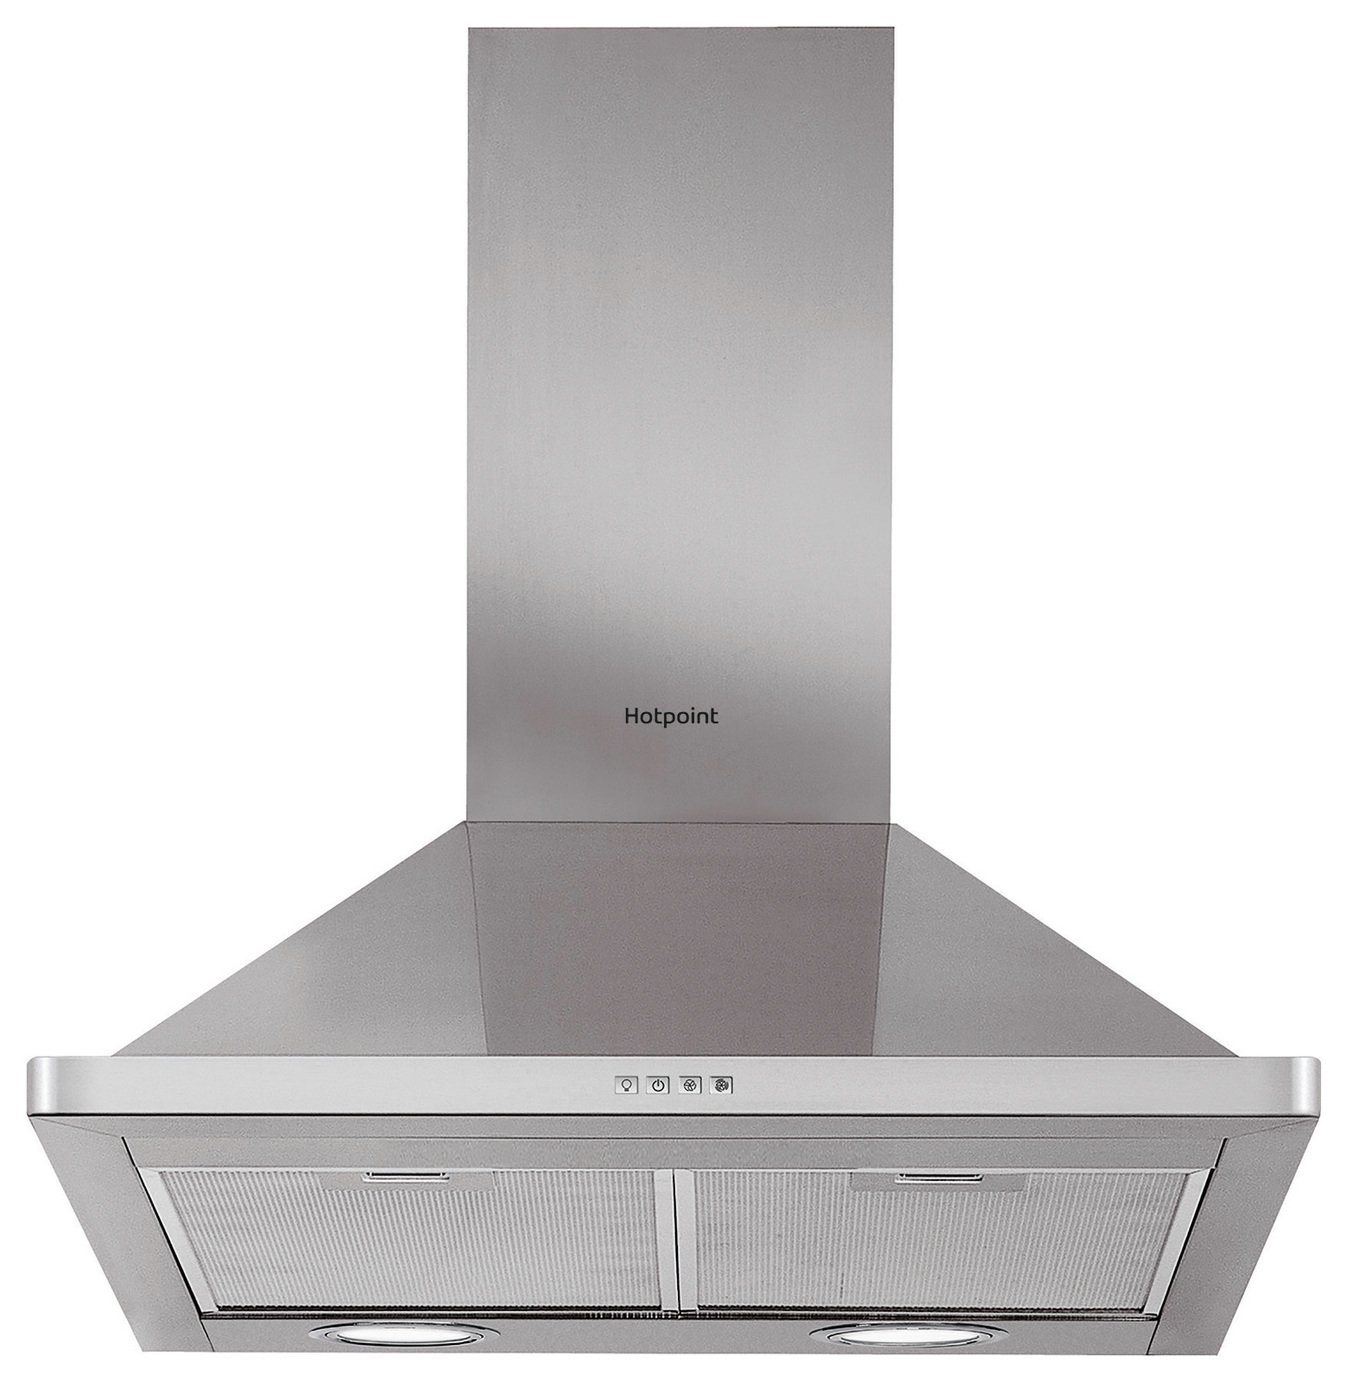 Hotpoint PHPN7.5FLMX 70cm Cooker Hood - Stainless Steel